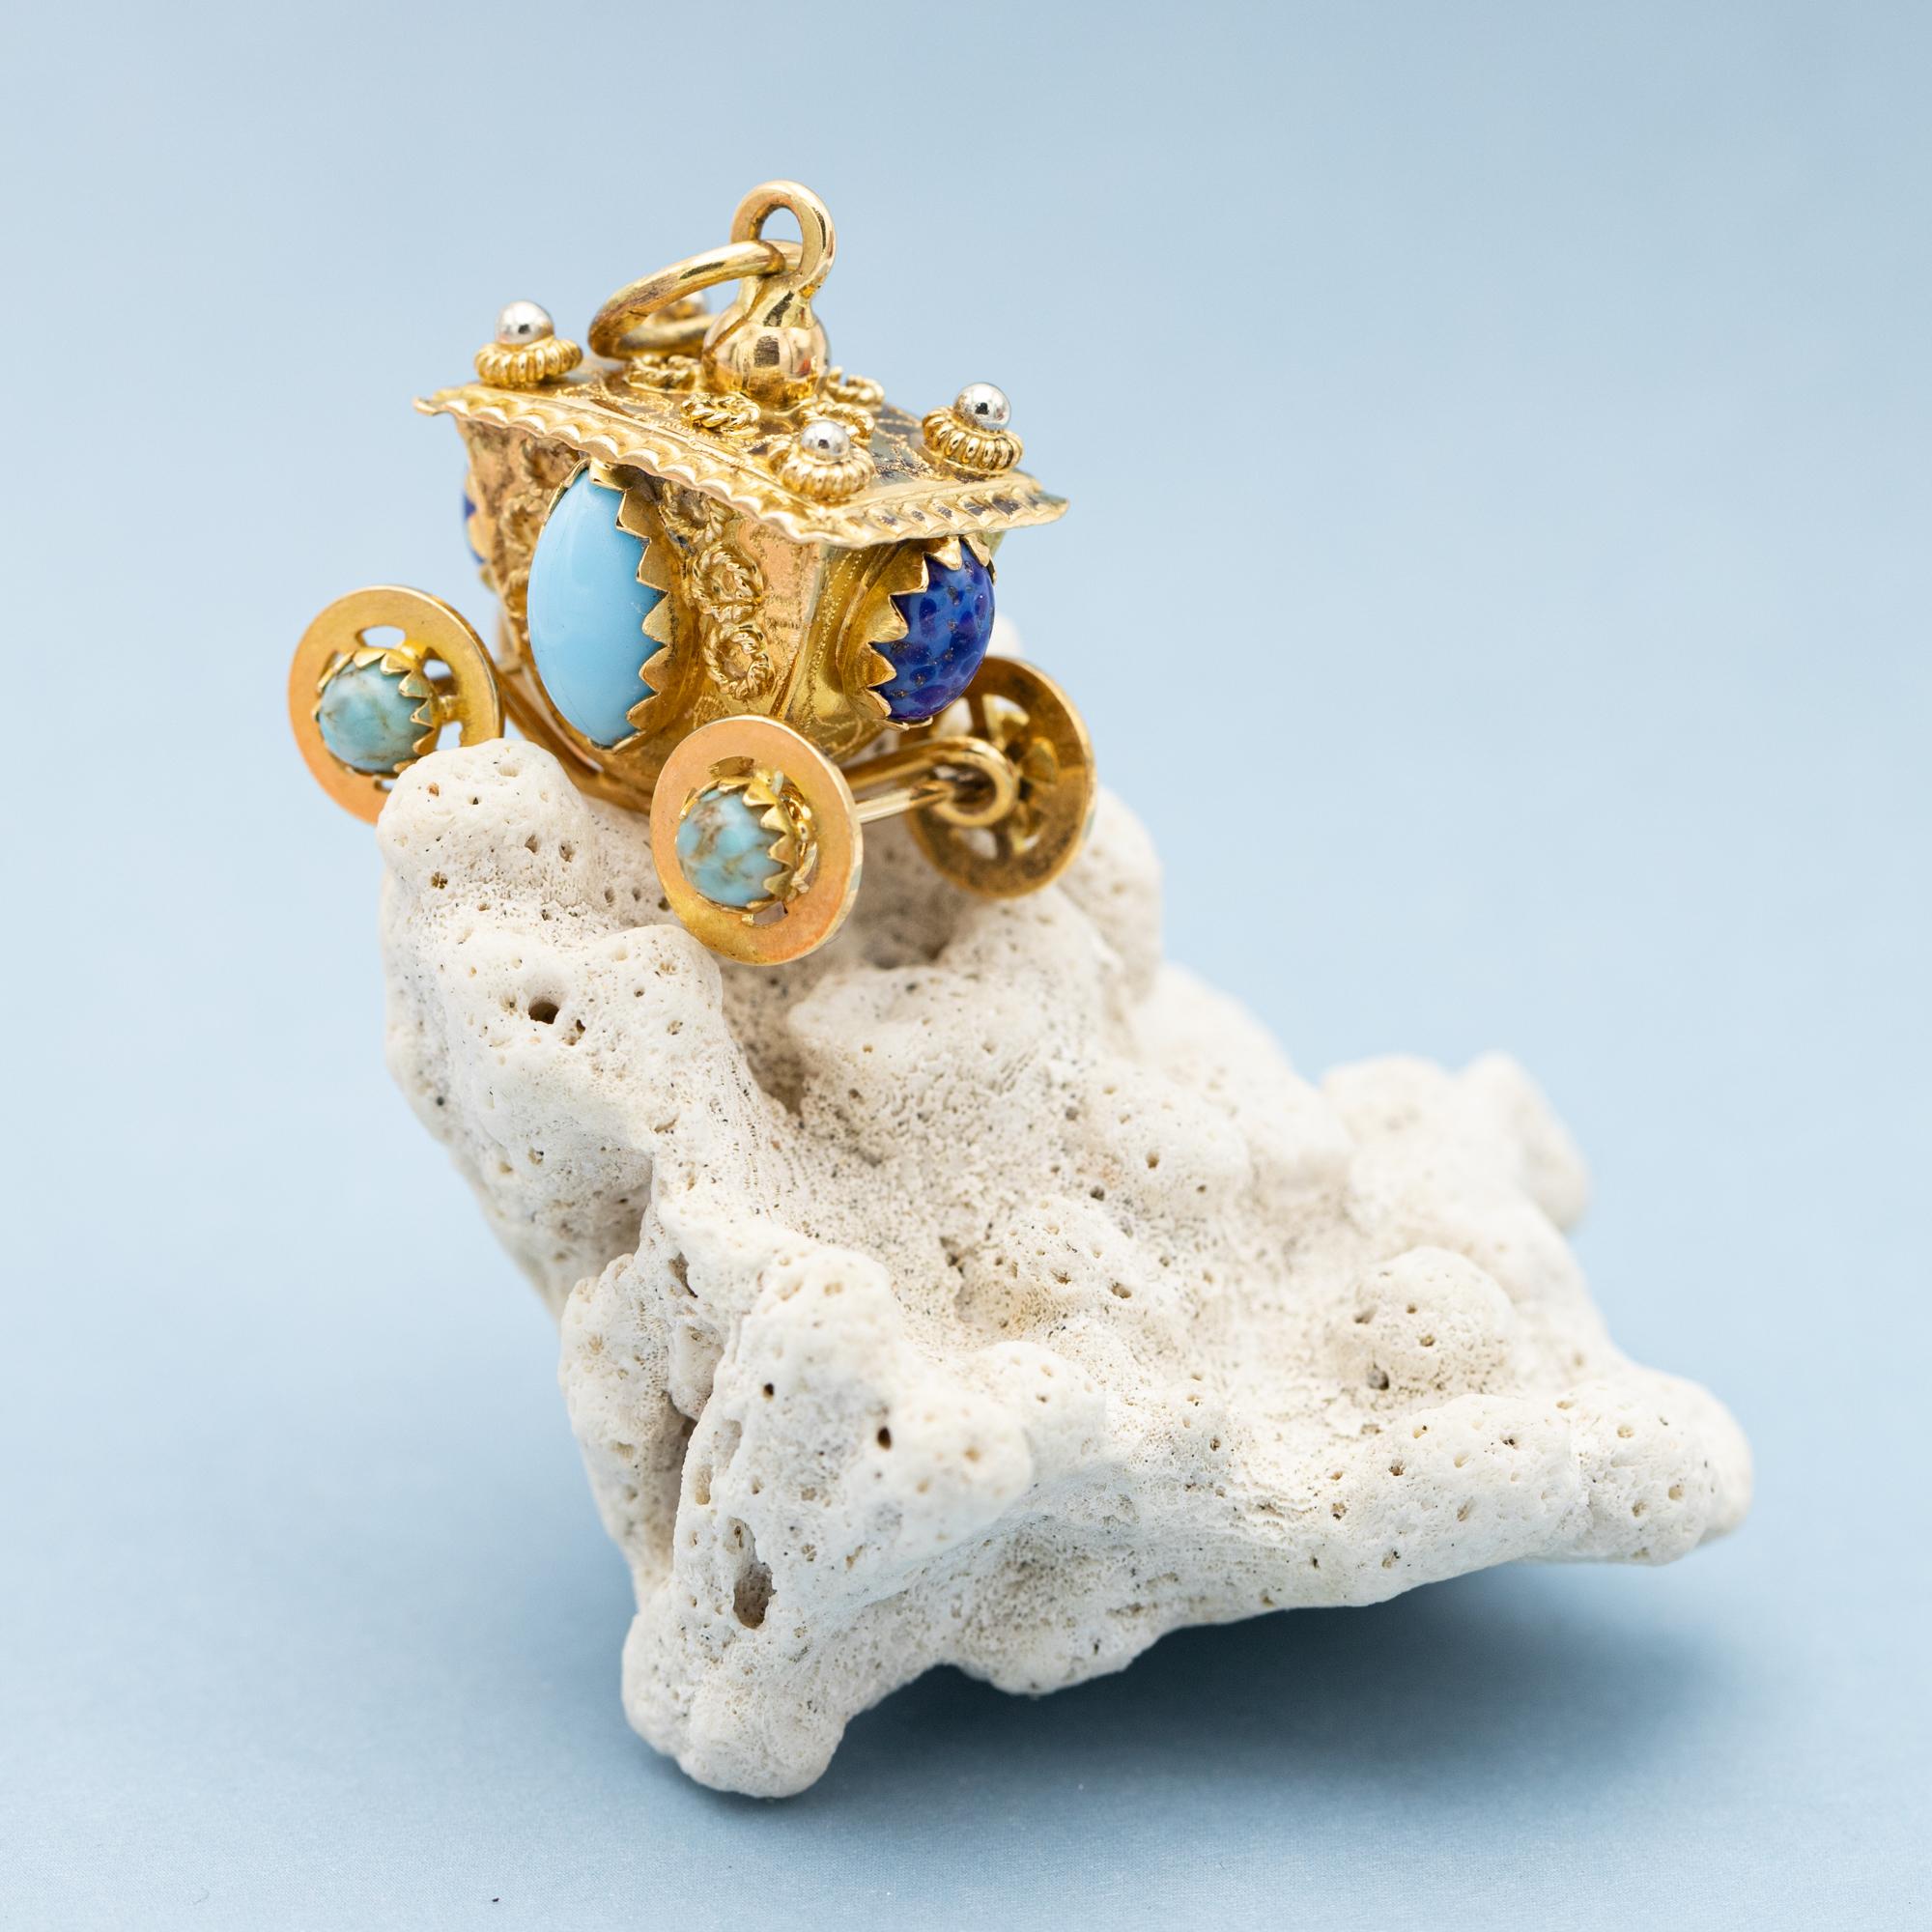 This stunning Italian charm is crafted in 18 ct yellow gold and set with eight cabochon gemstones of which two are dark, sometimes speckled, blue. The other six are turquoise. This wonderful and magnificent hand made vintage carriage pendant is